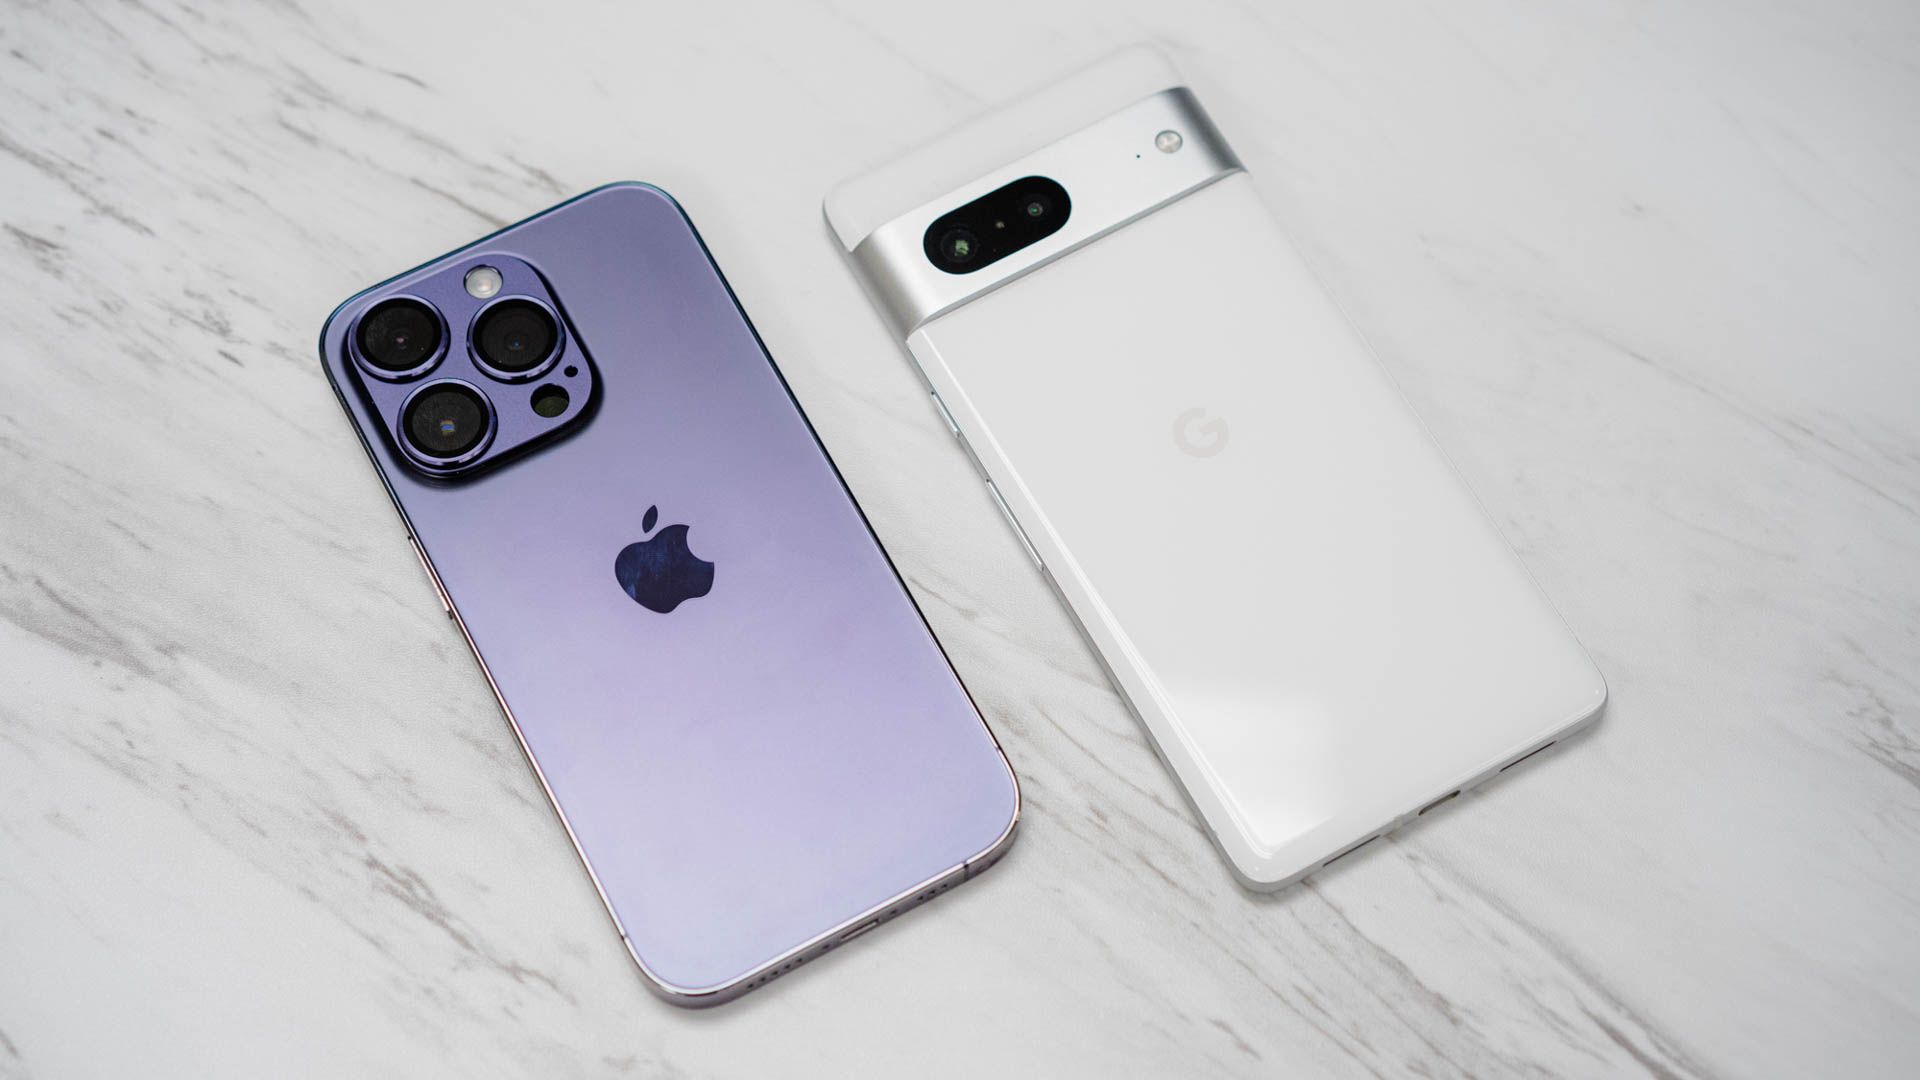 An iPhone 14 Pro and a Google Pixel 7 laid next to each other